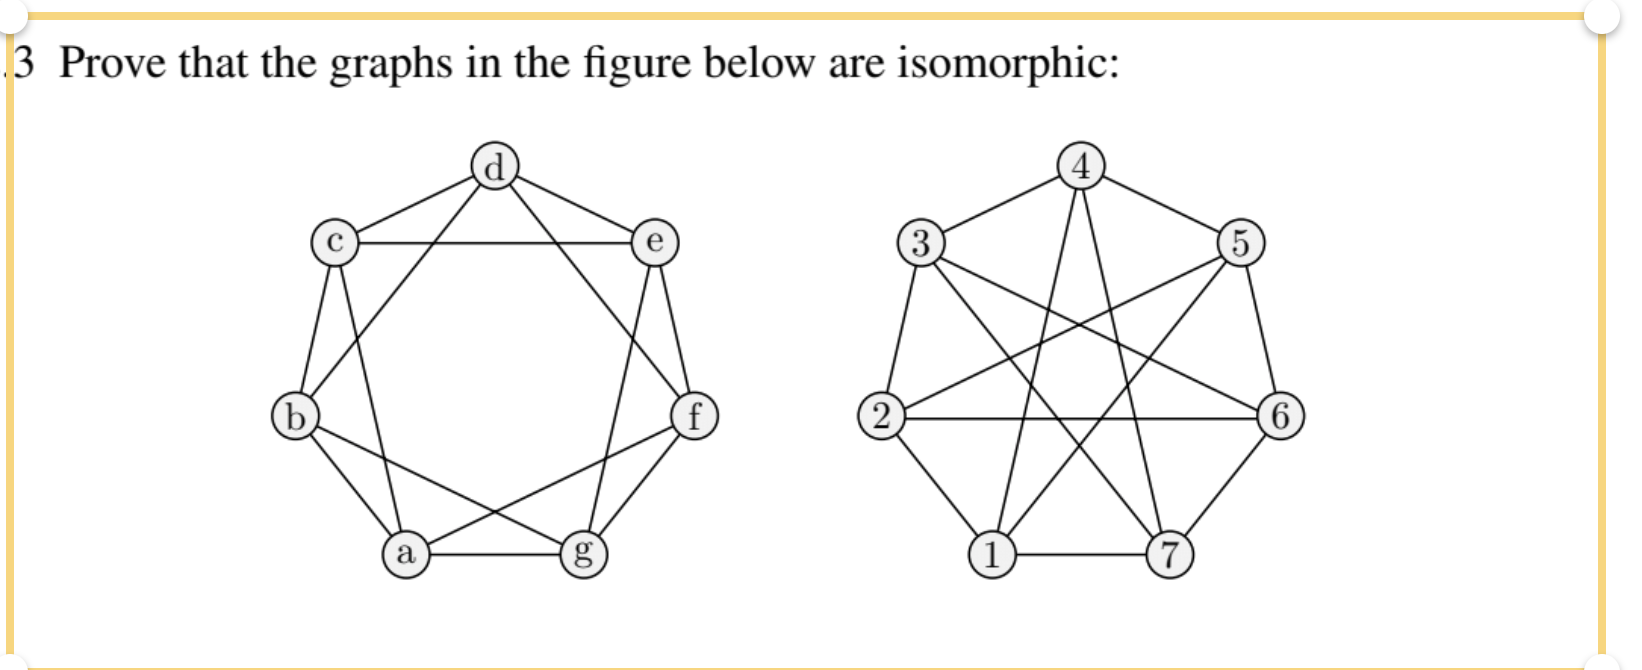 Prove that the graphs in the figure below are isomorphic:
(2
6.
a
